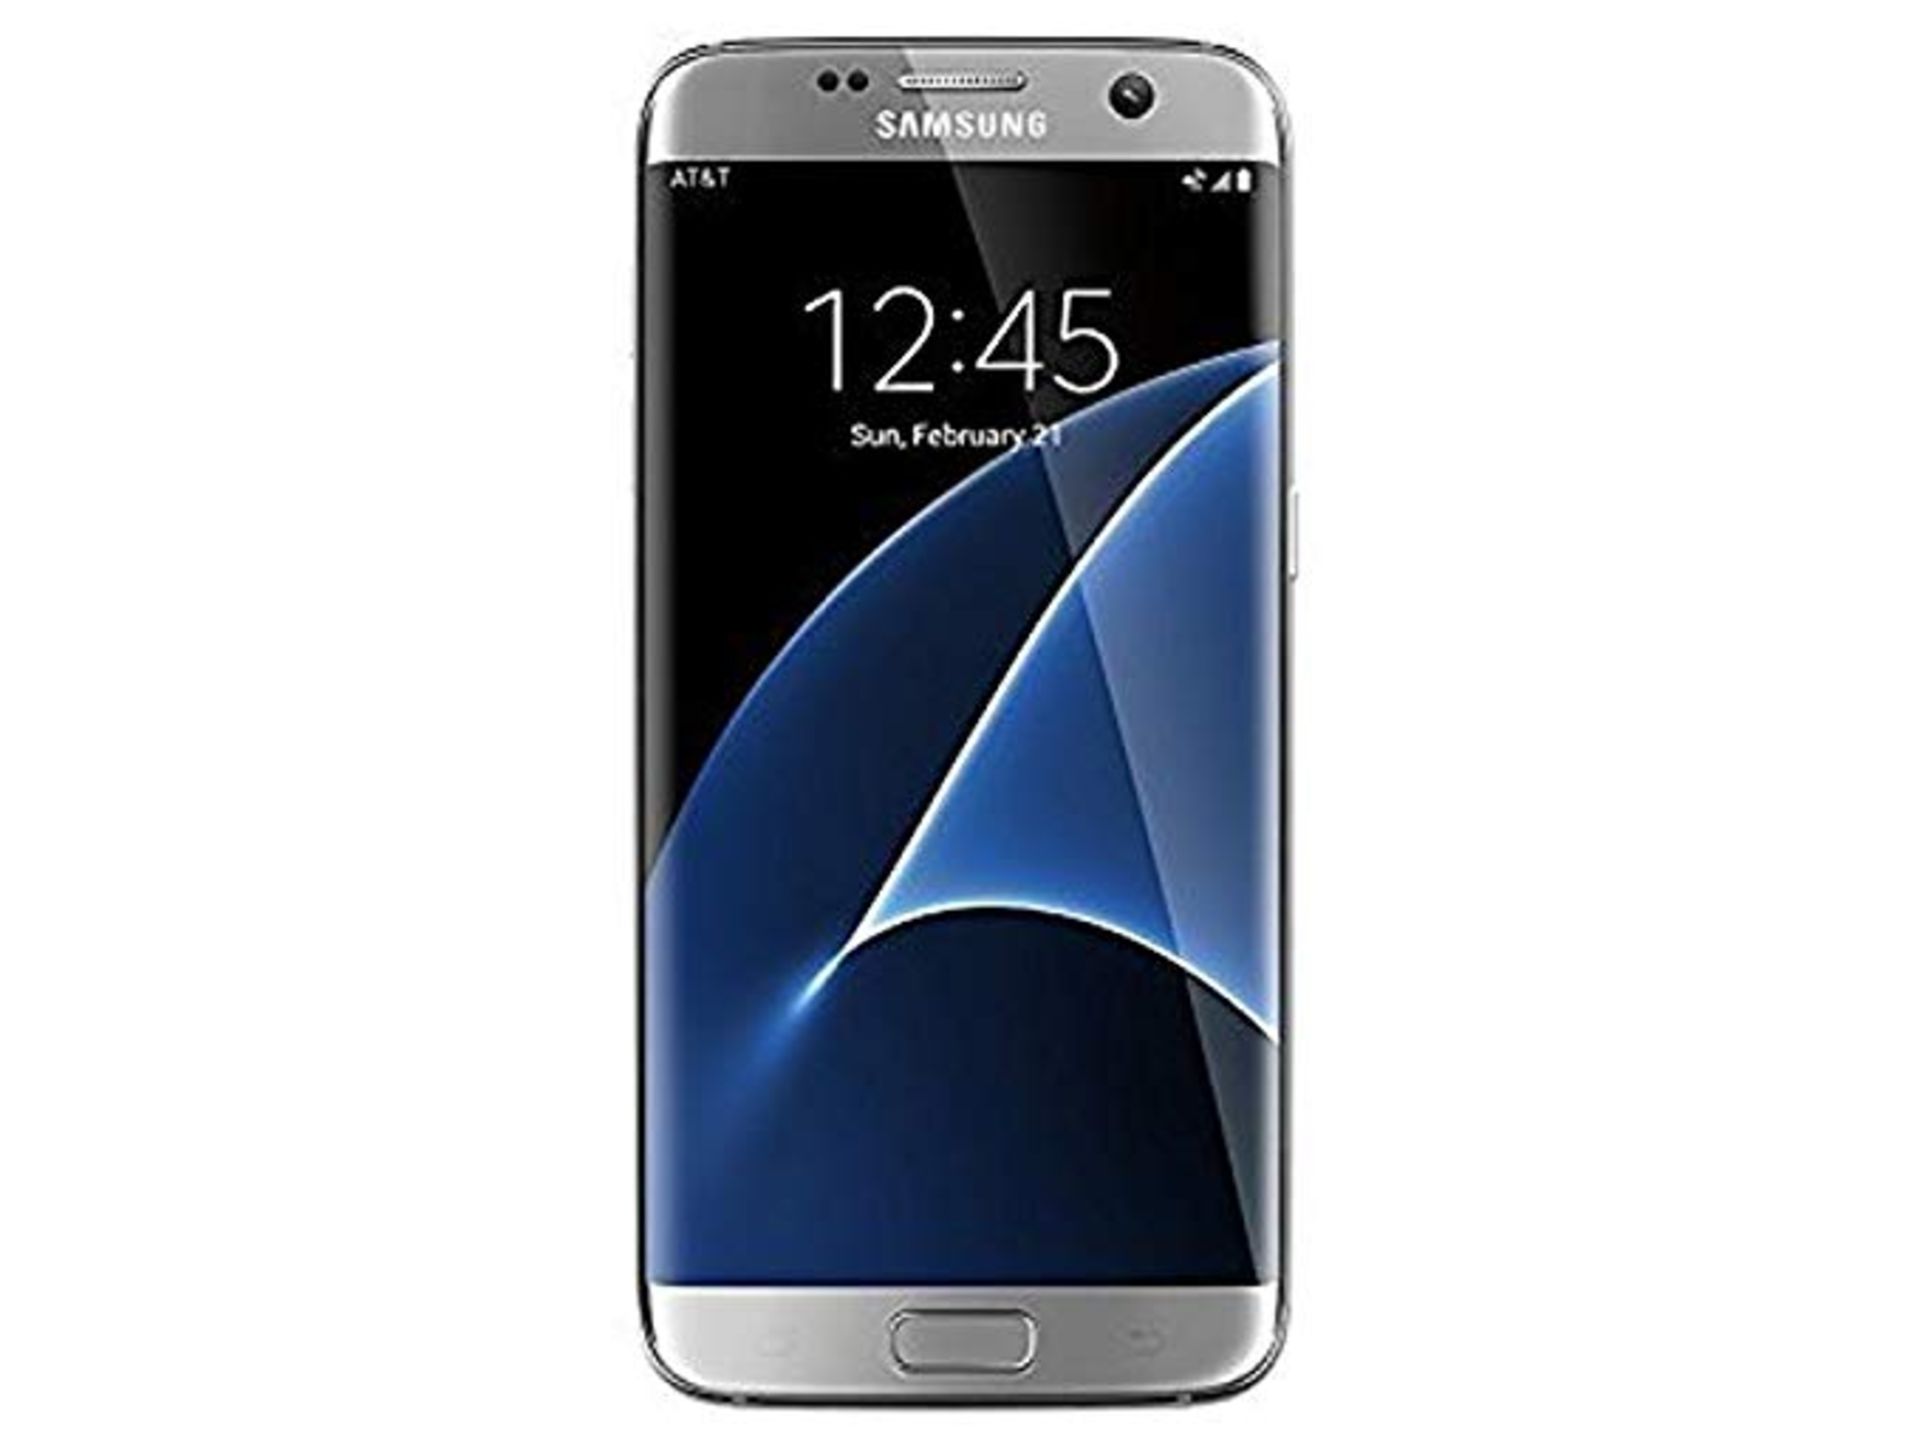 Grade A Samsung Galaxy S7 Edge (G935A/T/V/P) Colours May Vary - Item Available Approx 15 Working